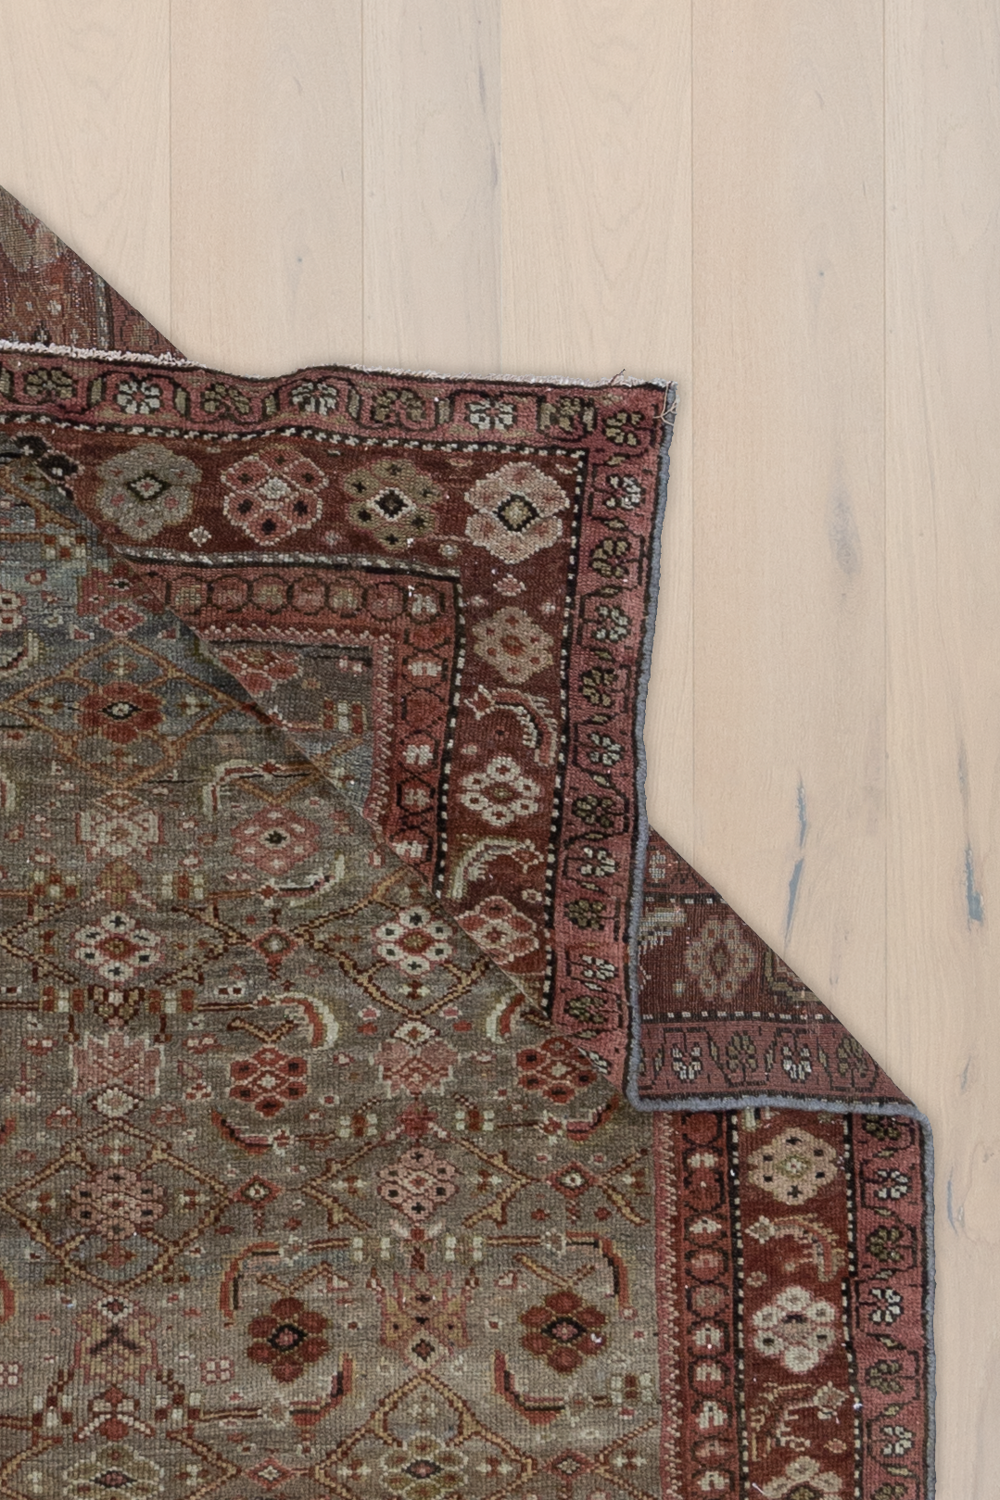 Antique Persian Malayer Gallery Rug